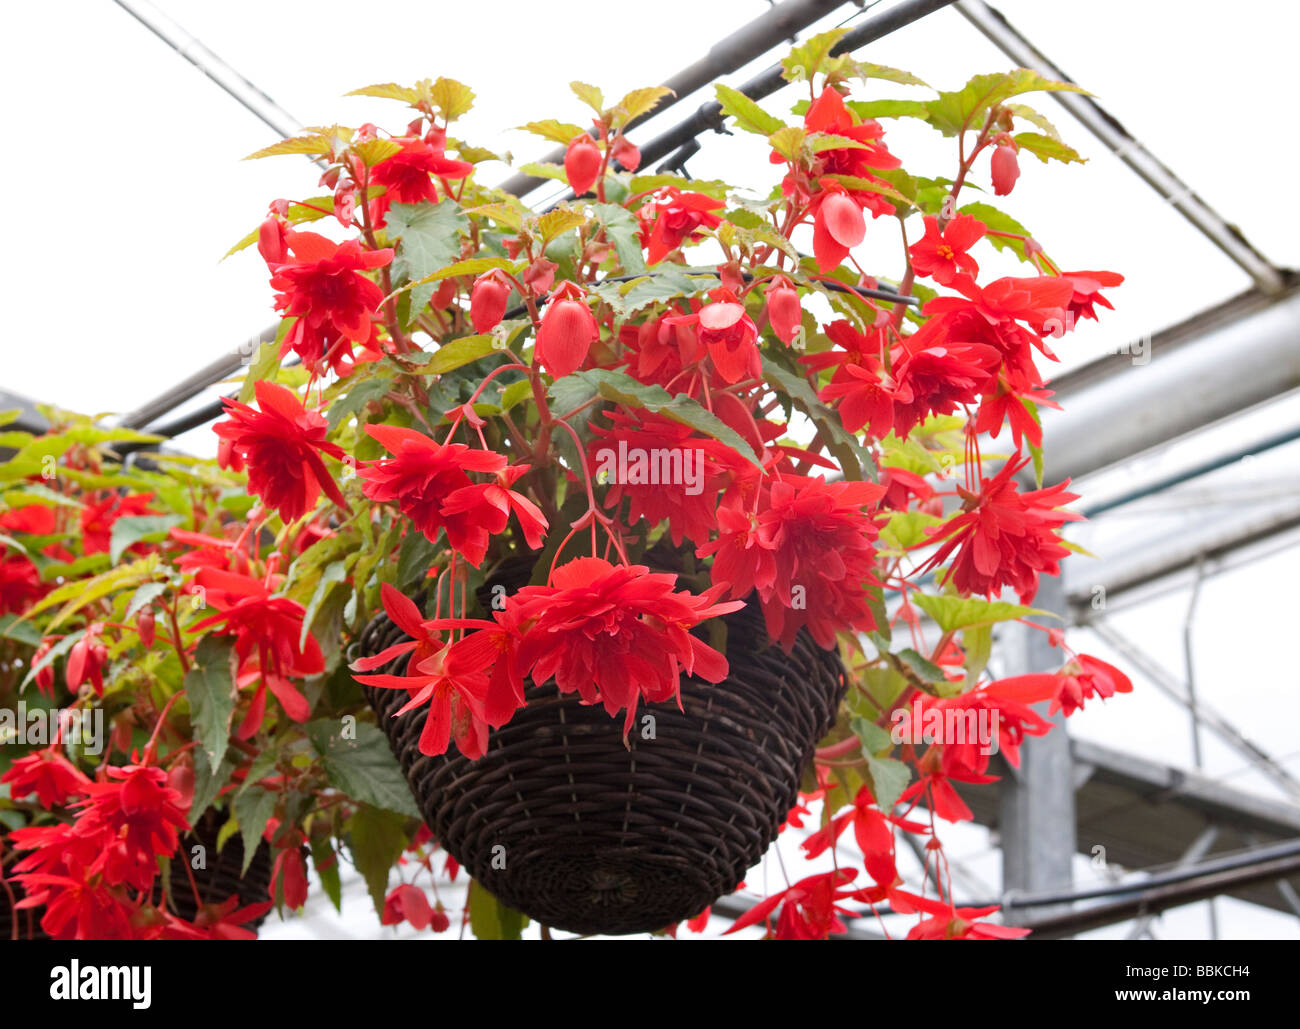 Begonia Hanging Baskets hanging from the roof of a nursery glasshouse Stock Photo